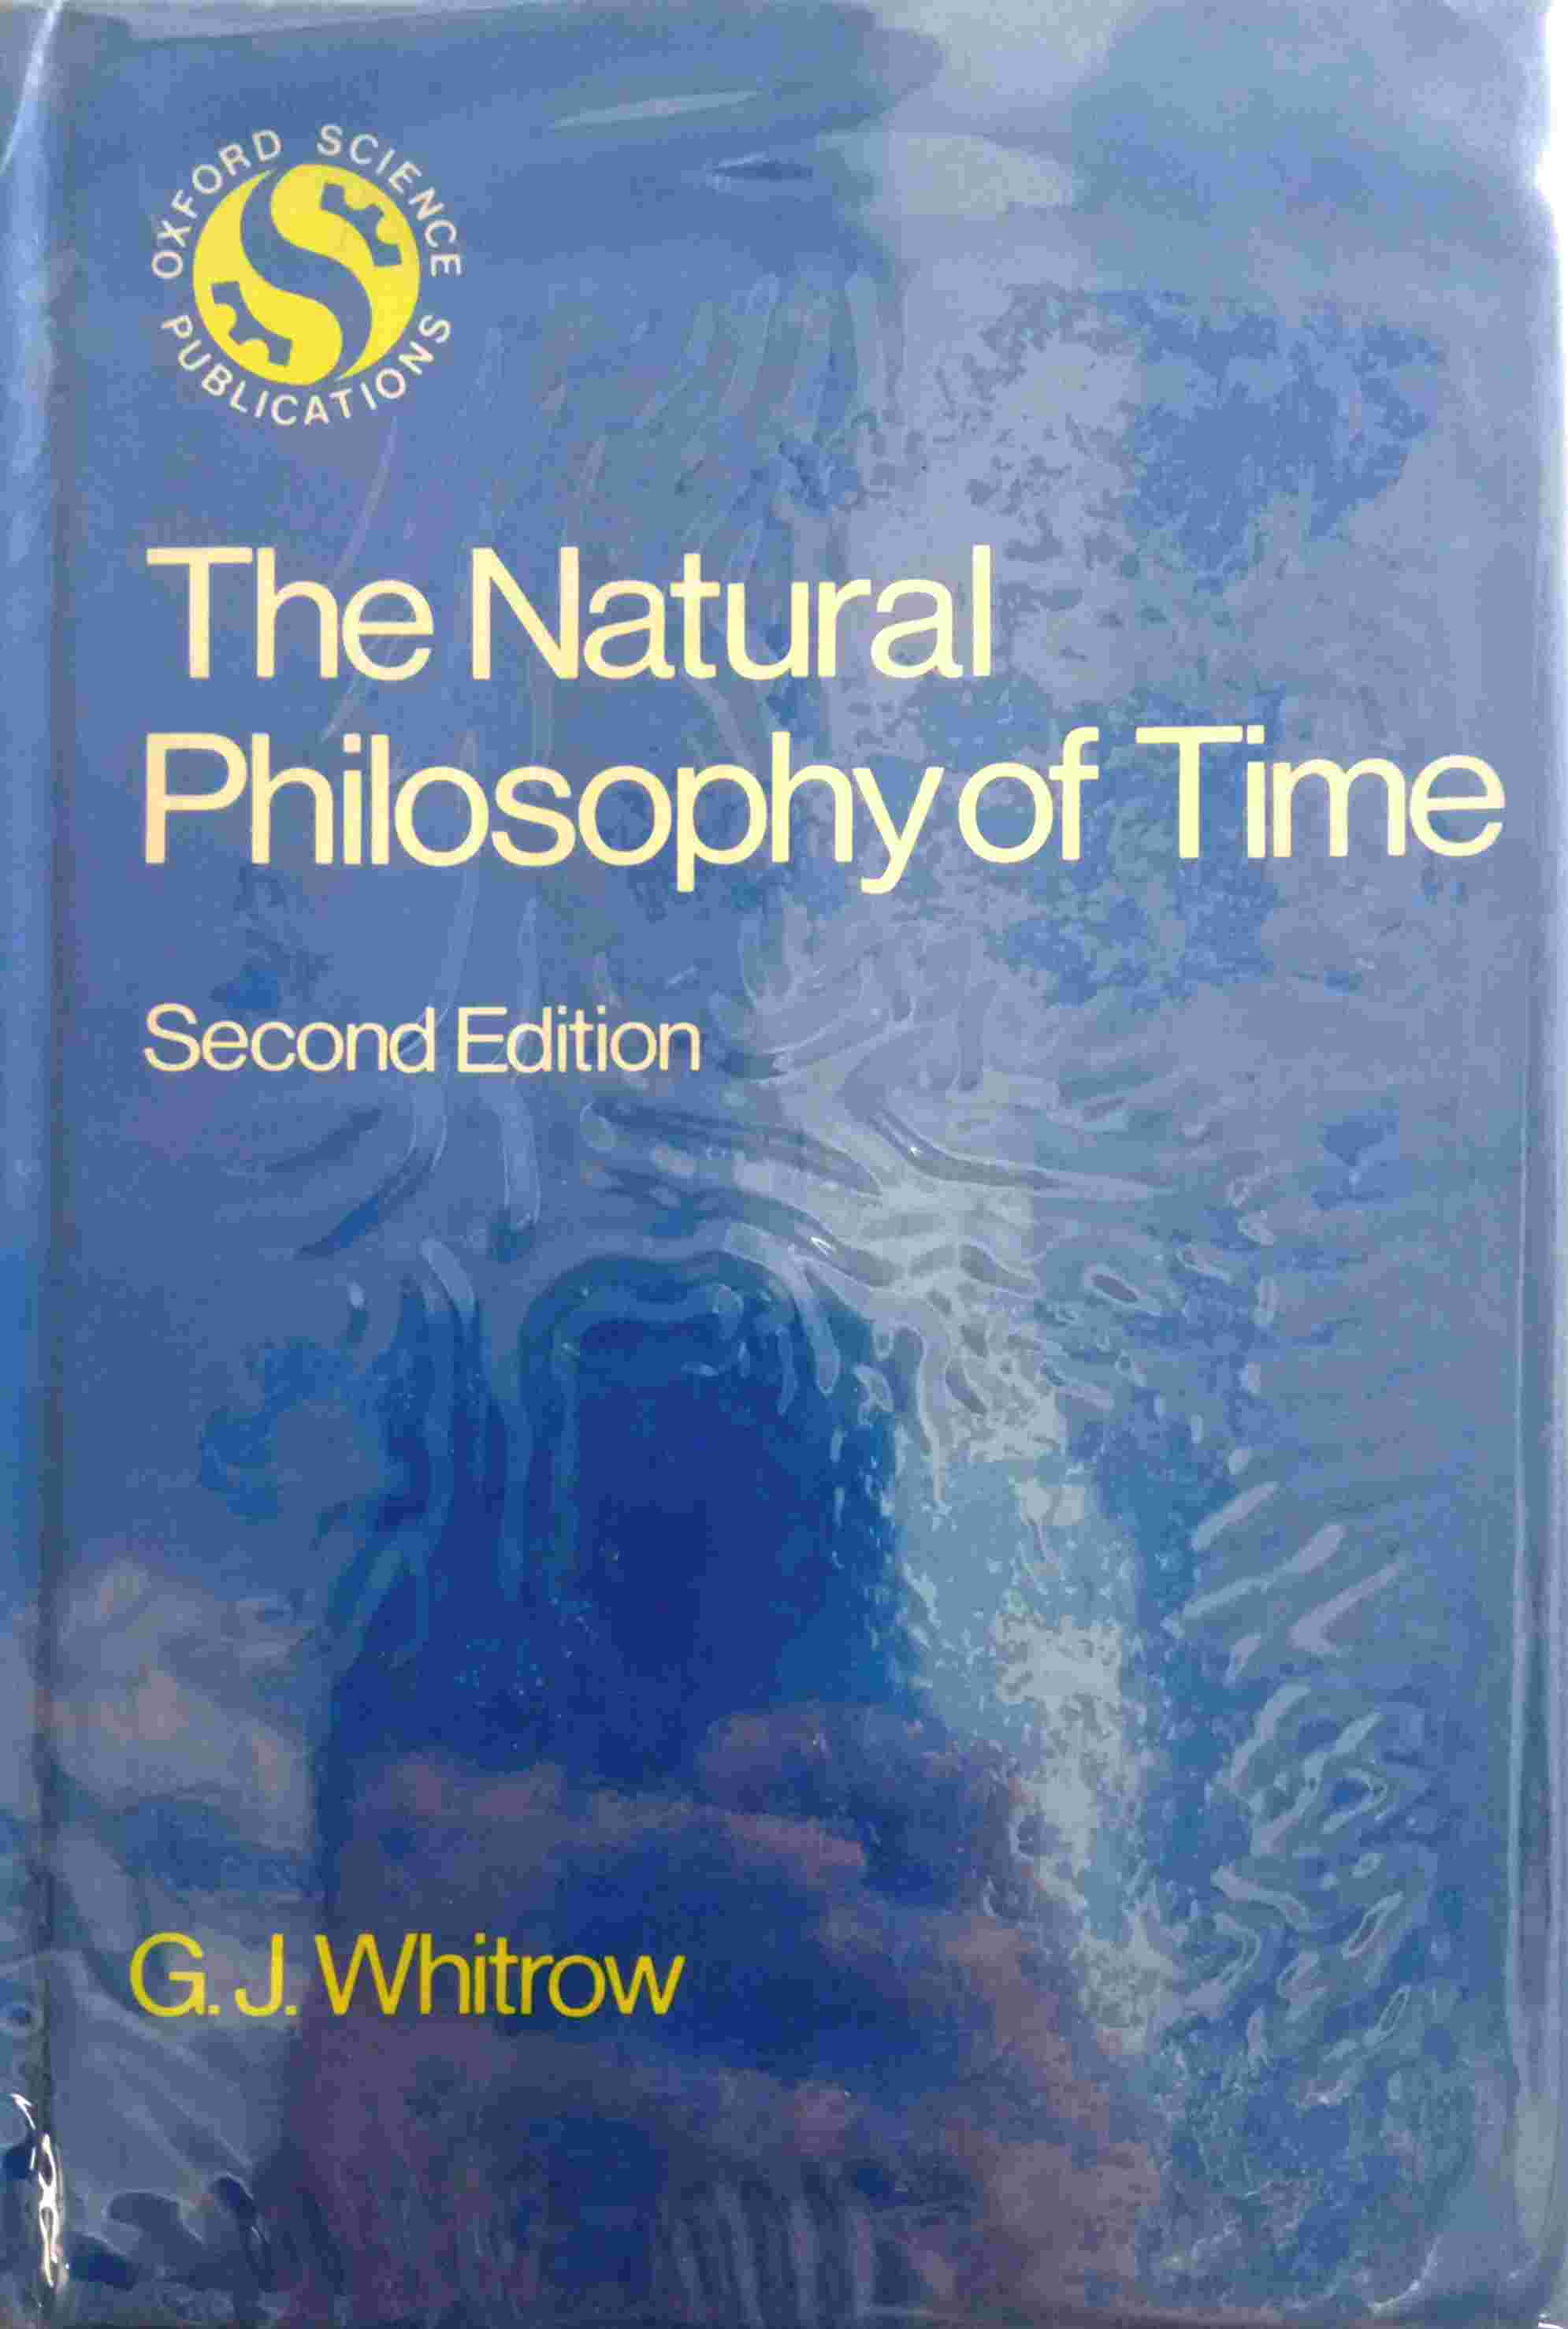 THE NATURAL PHILOSOPHY OF TIME